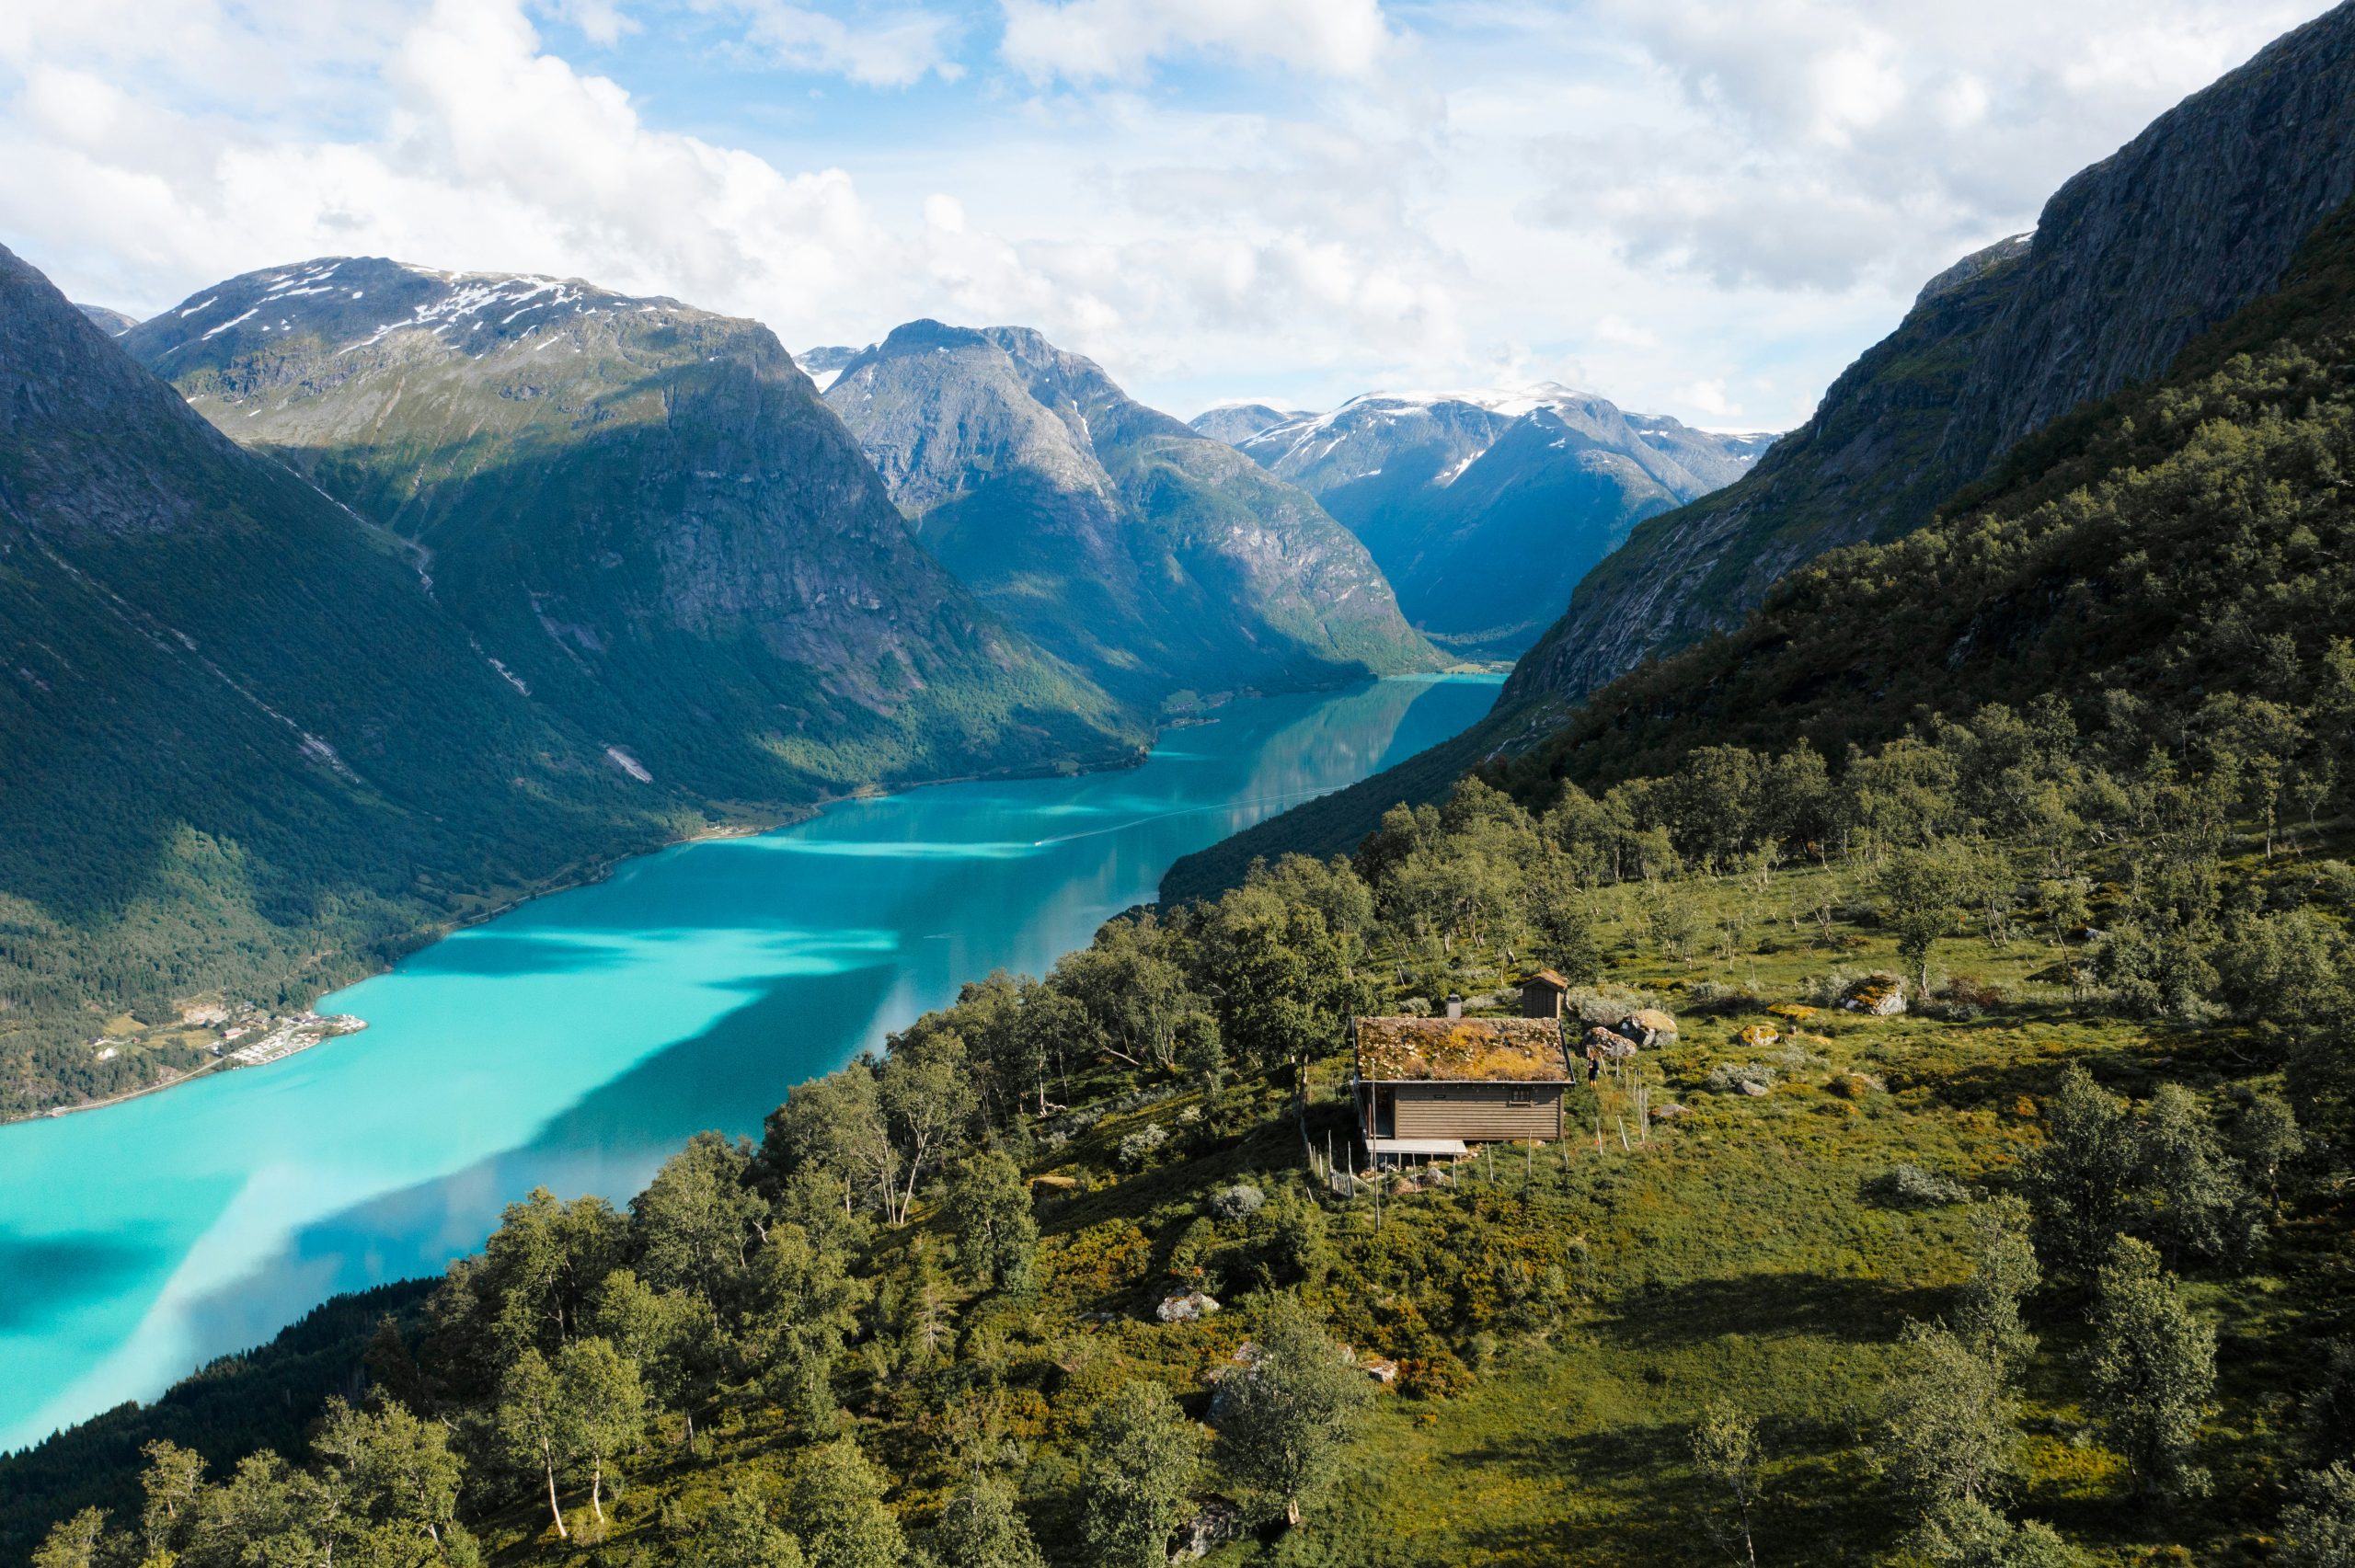 explore the breathtaking beauty of the norway fjords and immerse yourself in stunning natural landscapes. discover the awe-inspiring wonder of these deep, glacial-carved inlets in scandinavia's enchanting wilderness.